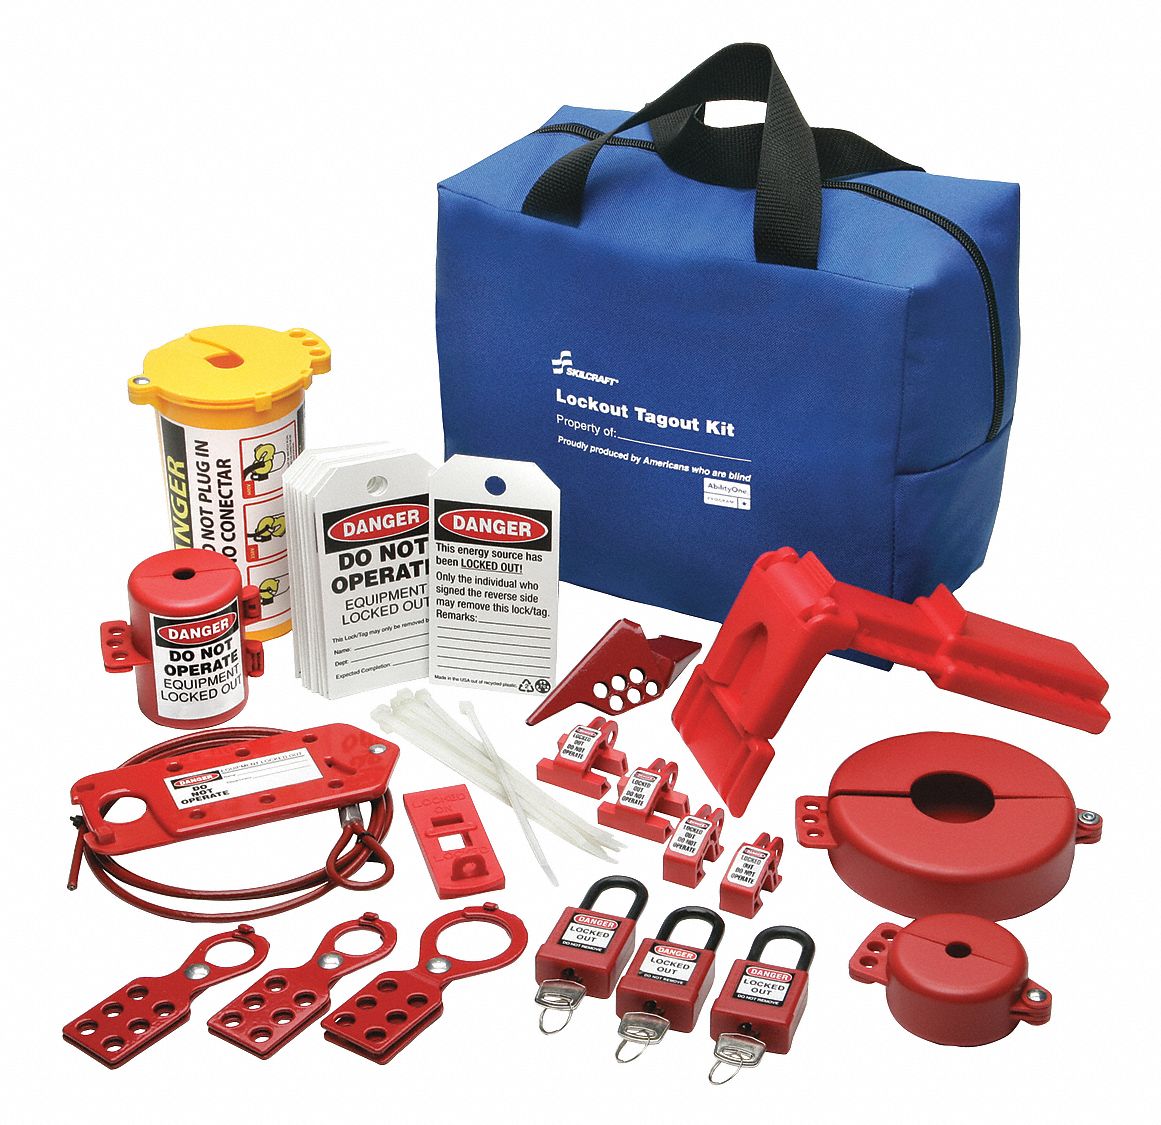 Lockout Tagout Kit for safety 